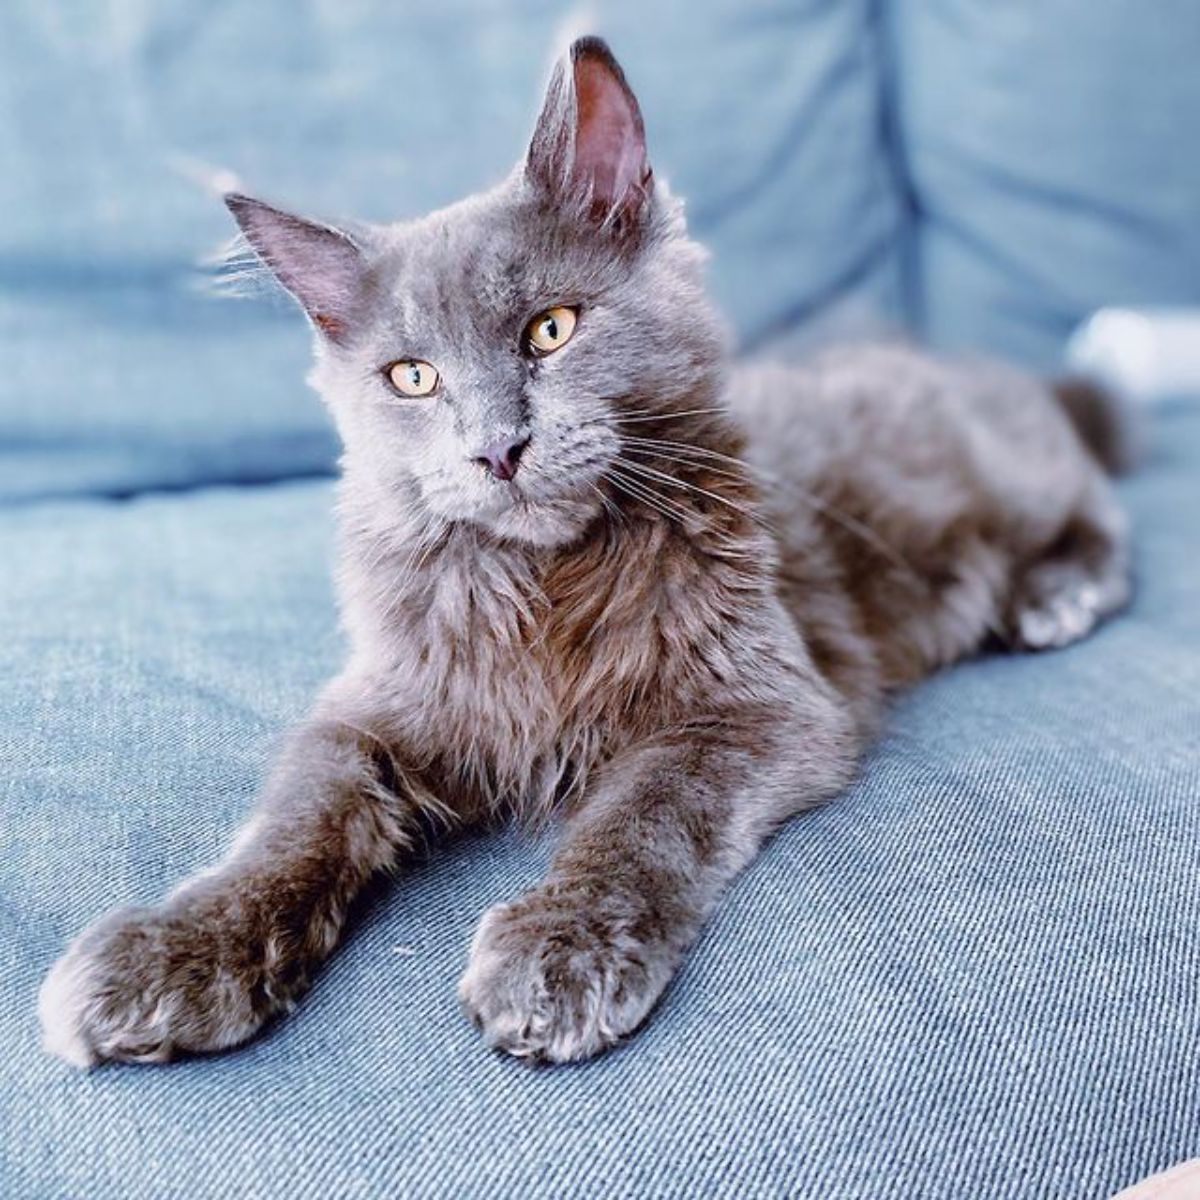 Adorable gray maine coon kitten lying on a blue couch.